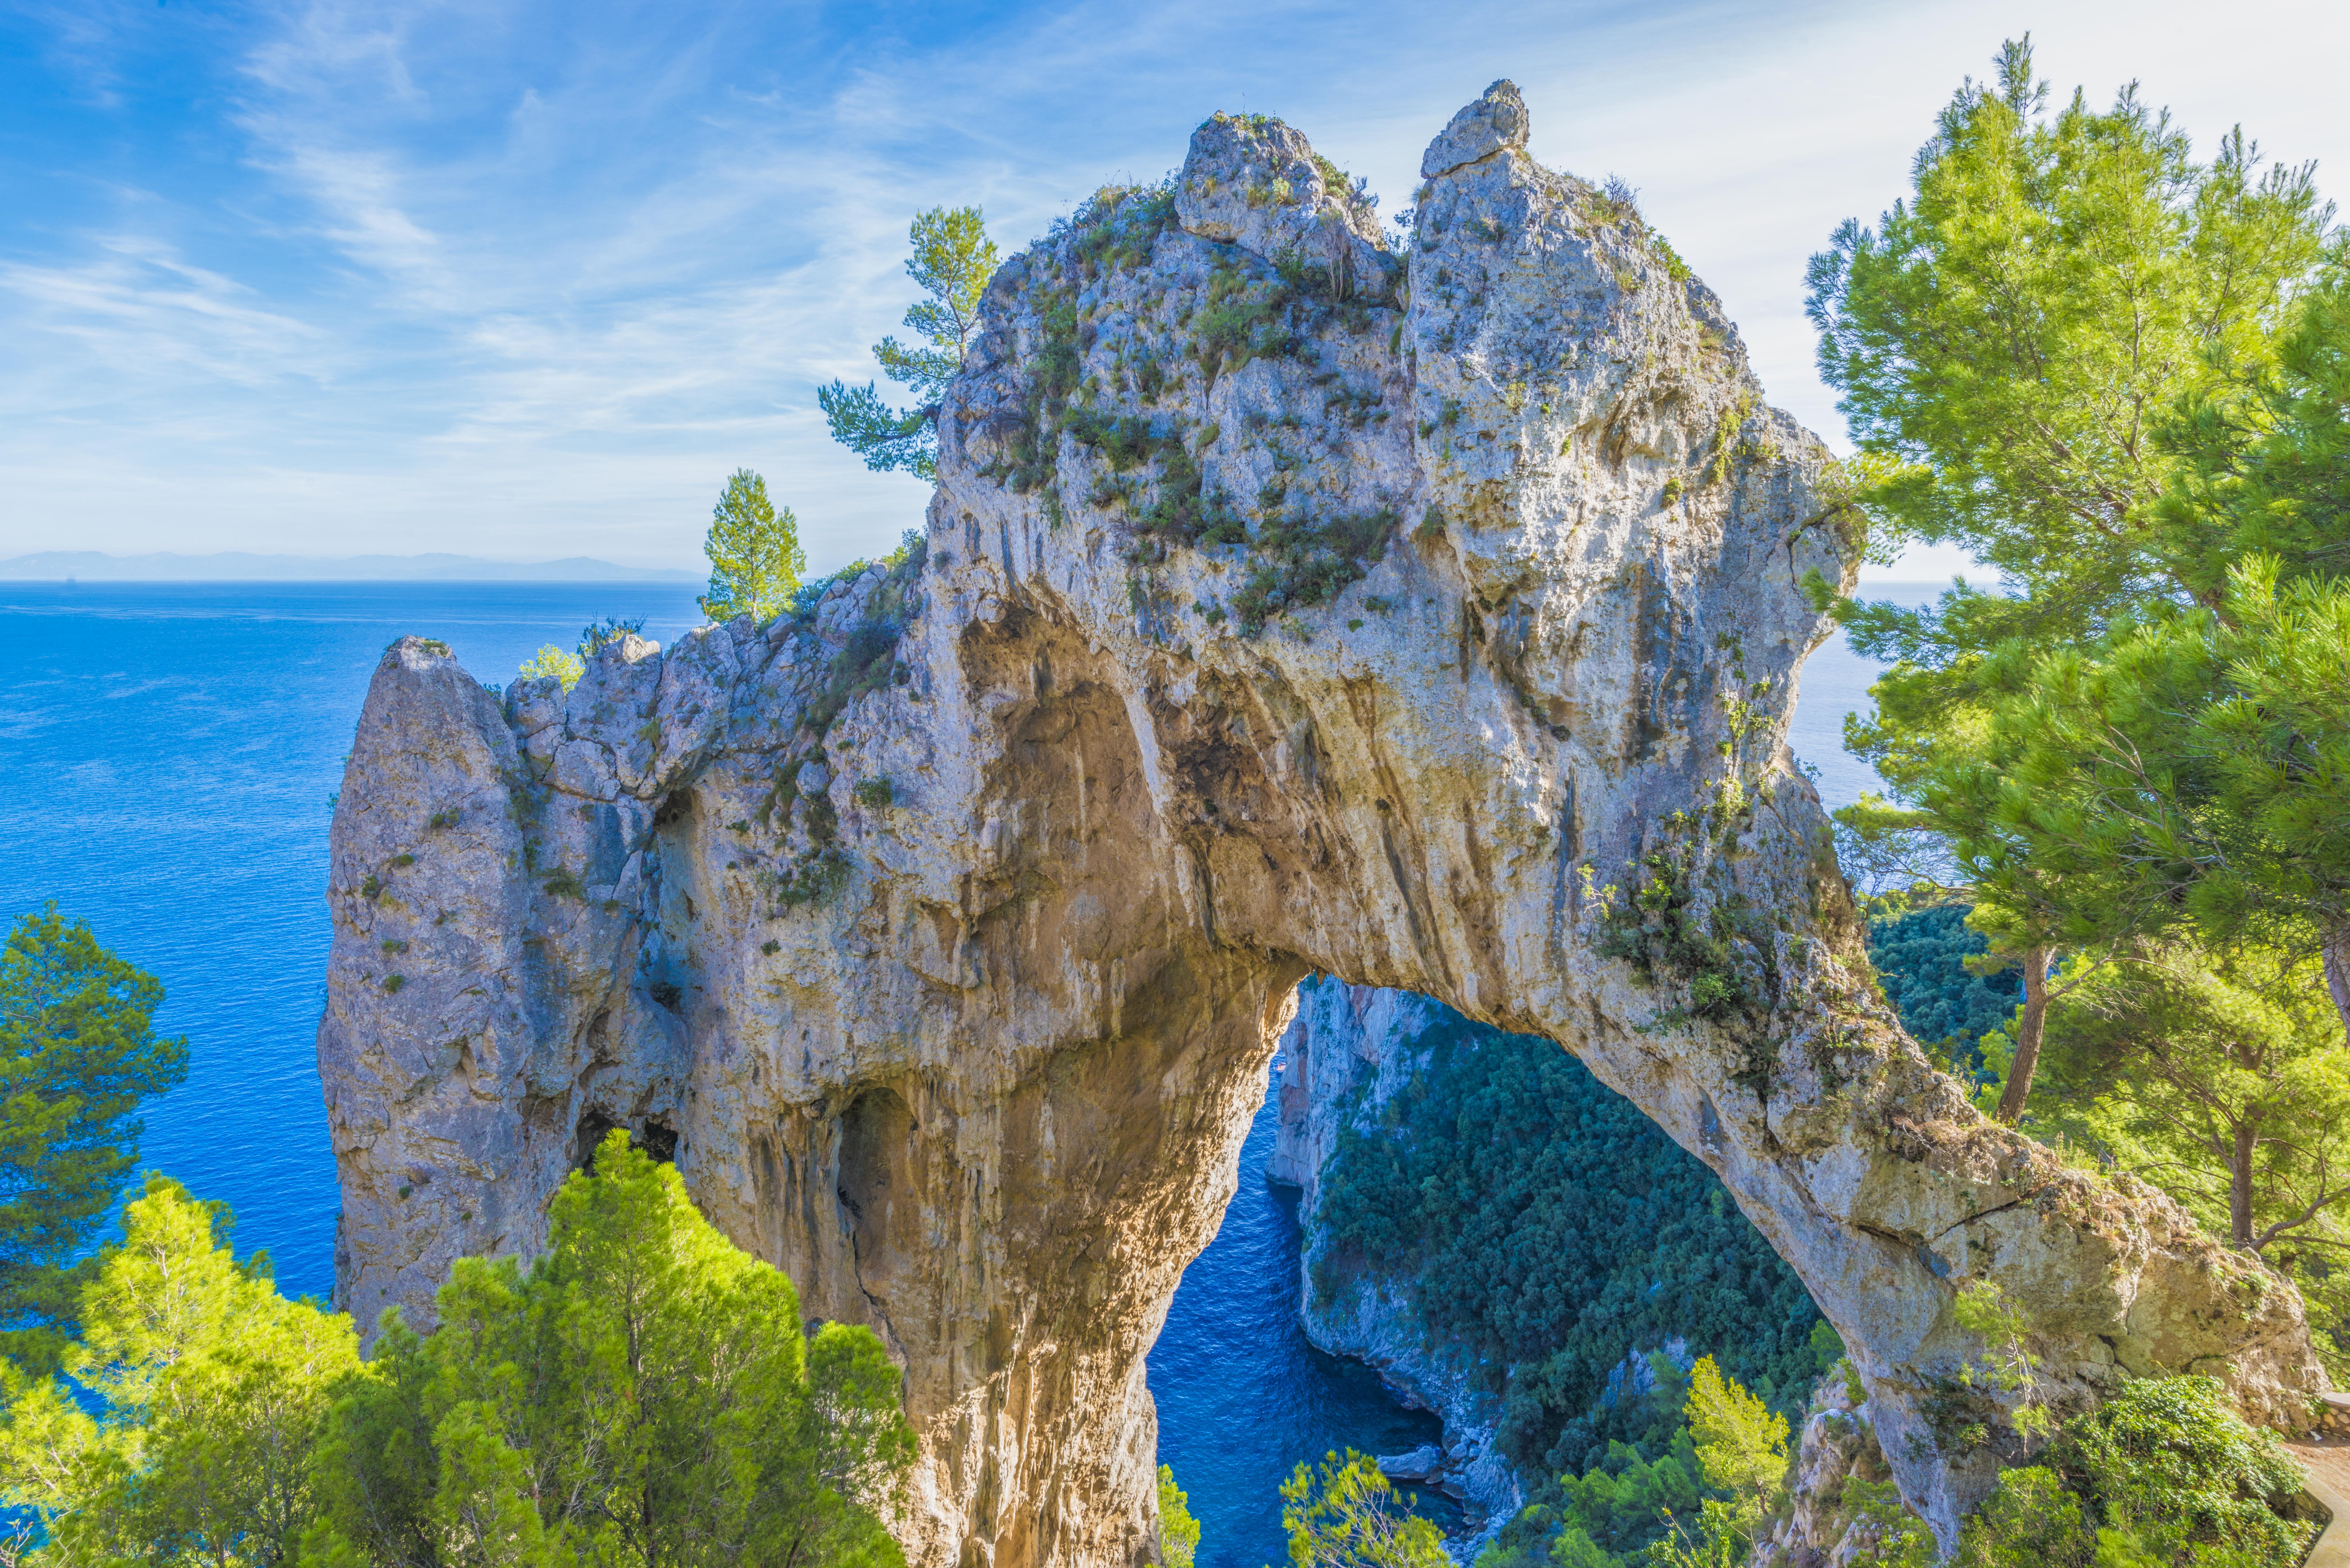 quadriple natural arch on cliffs above Capri and Tyrrhenian Sea Photographed by Tom Till